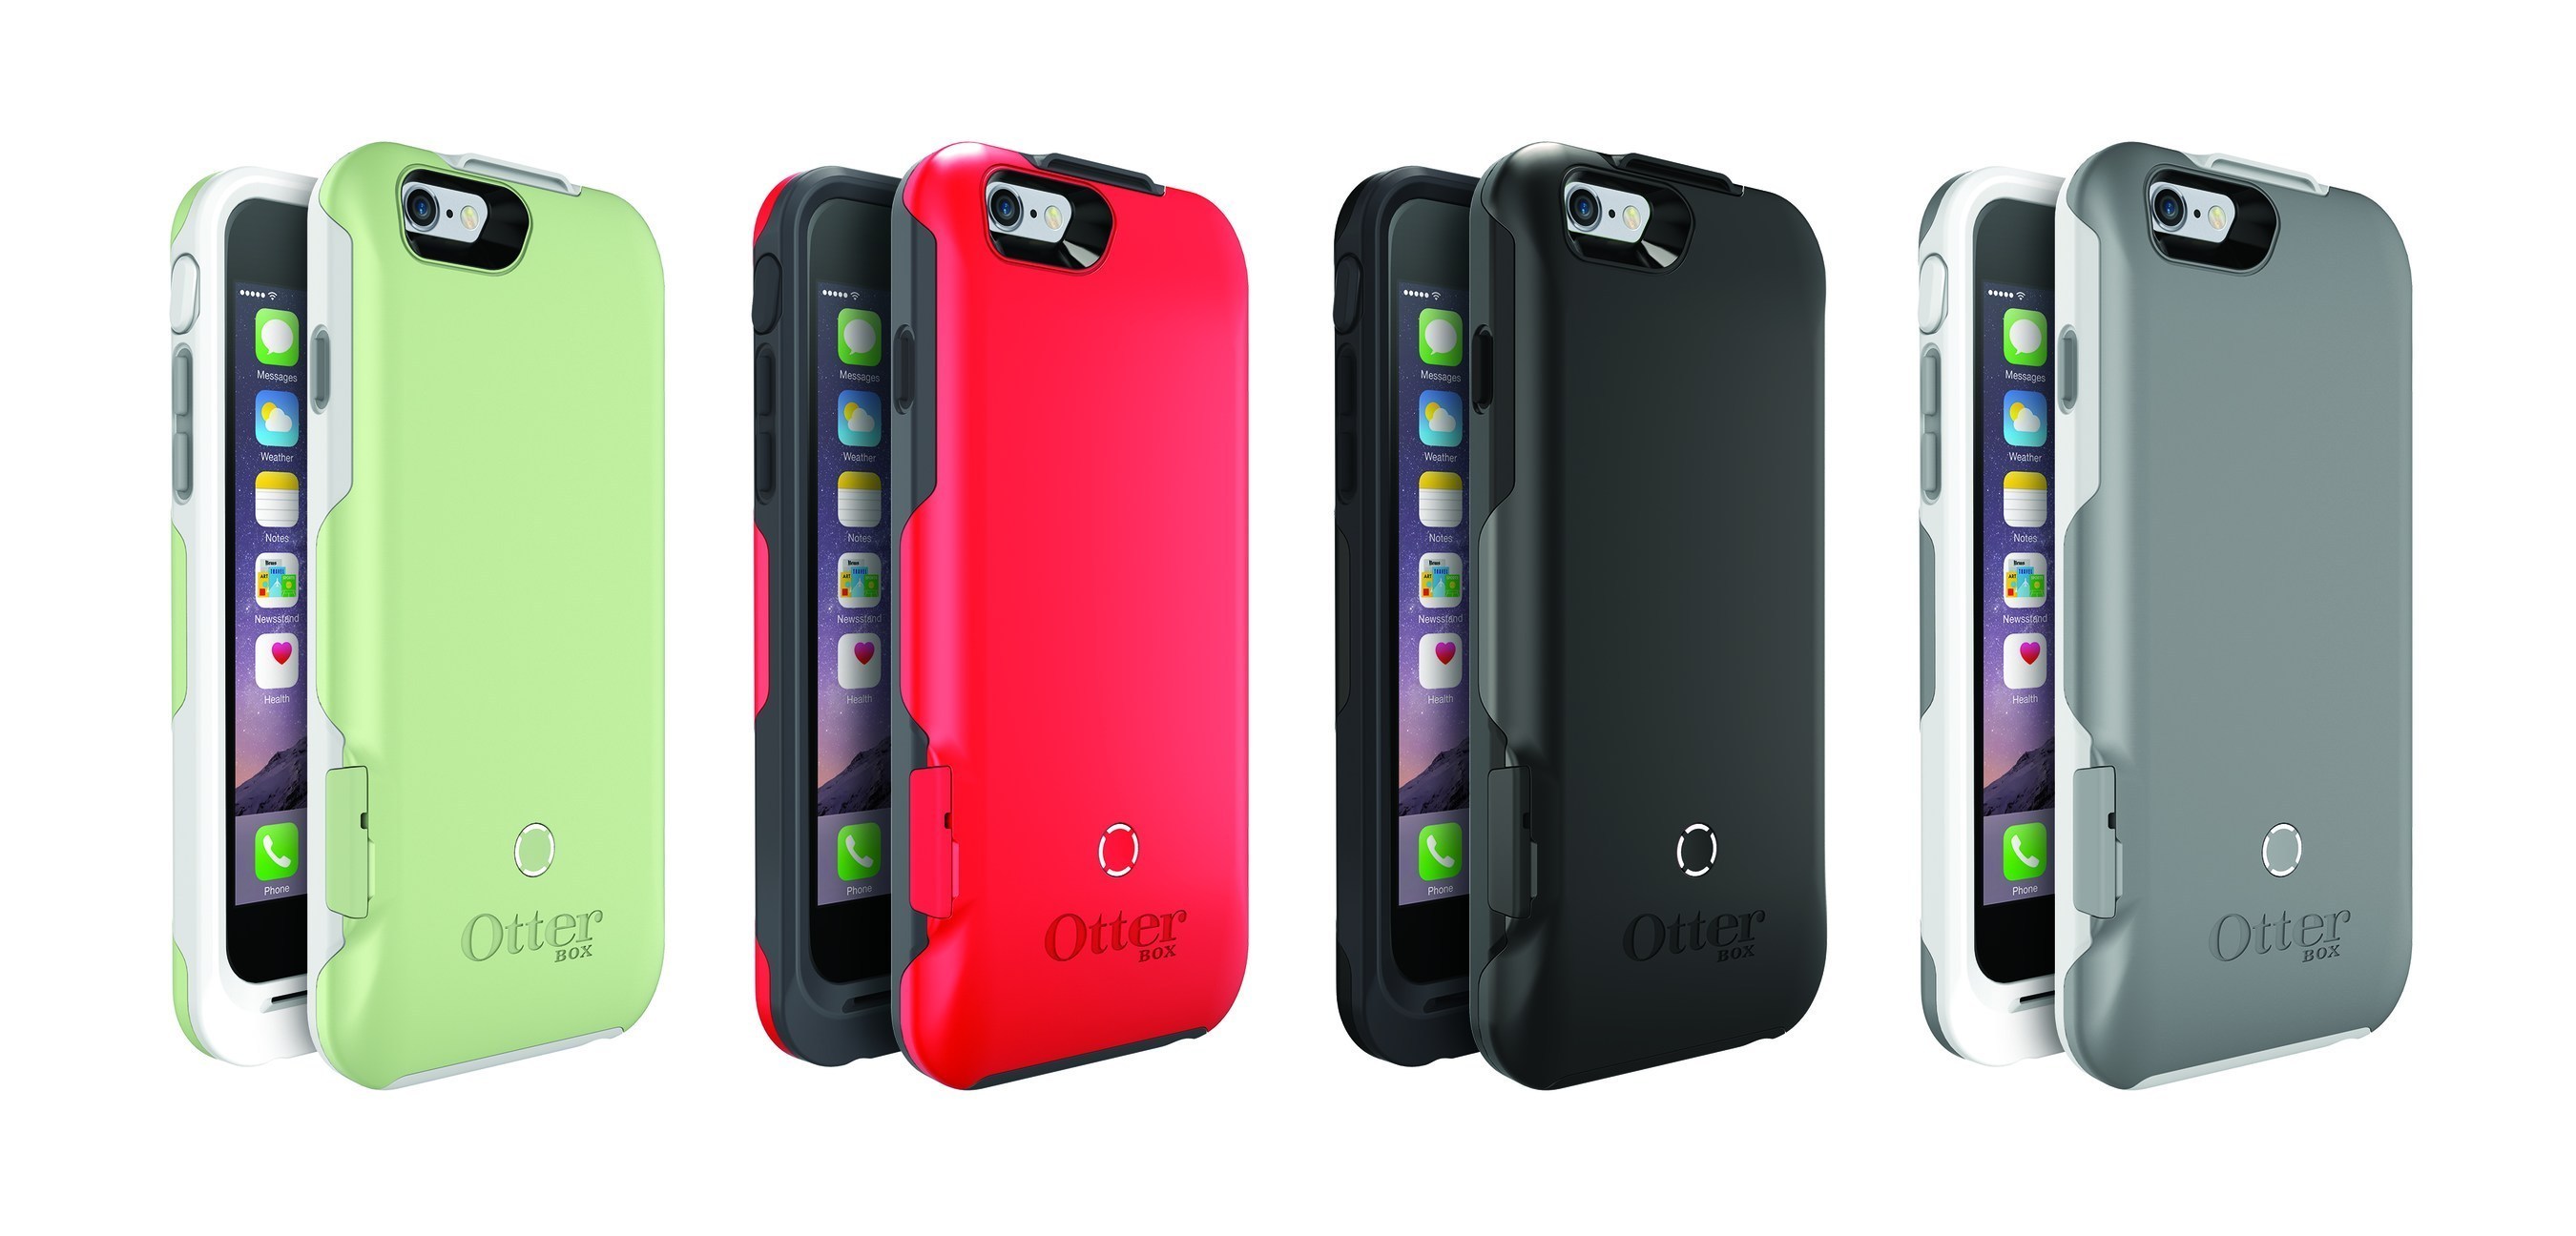 OtterBox Resurgence Power Case provides trusted protection and 2X battery life for iPhone 6.